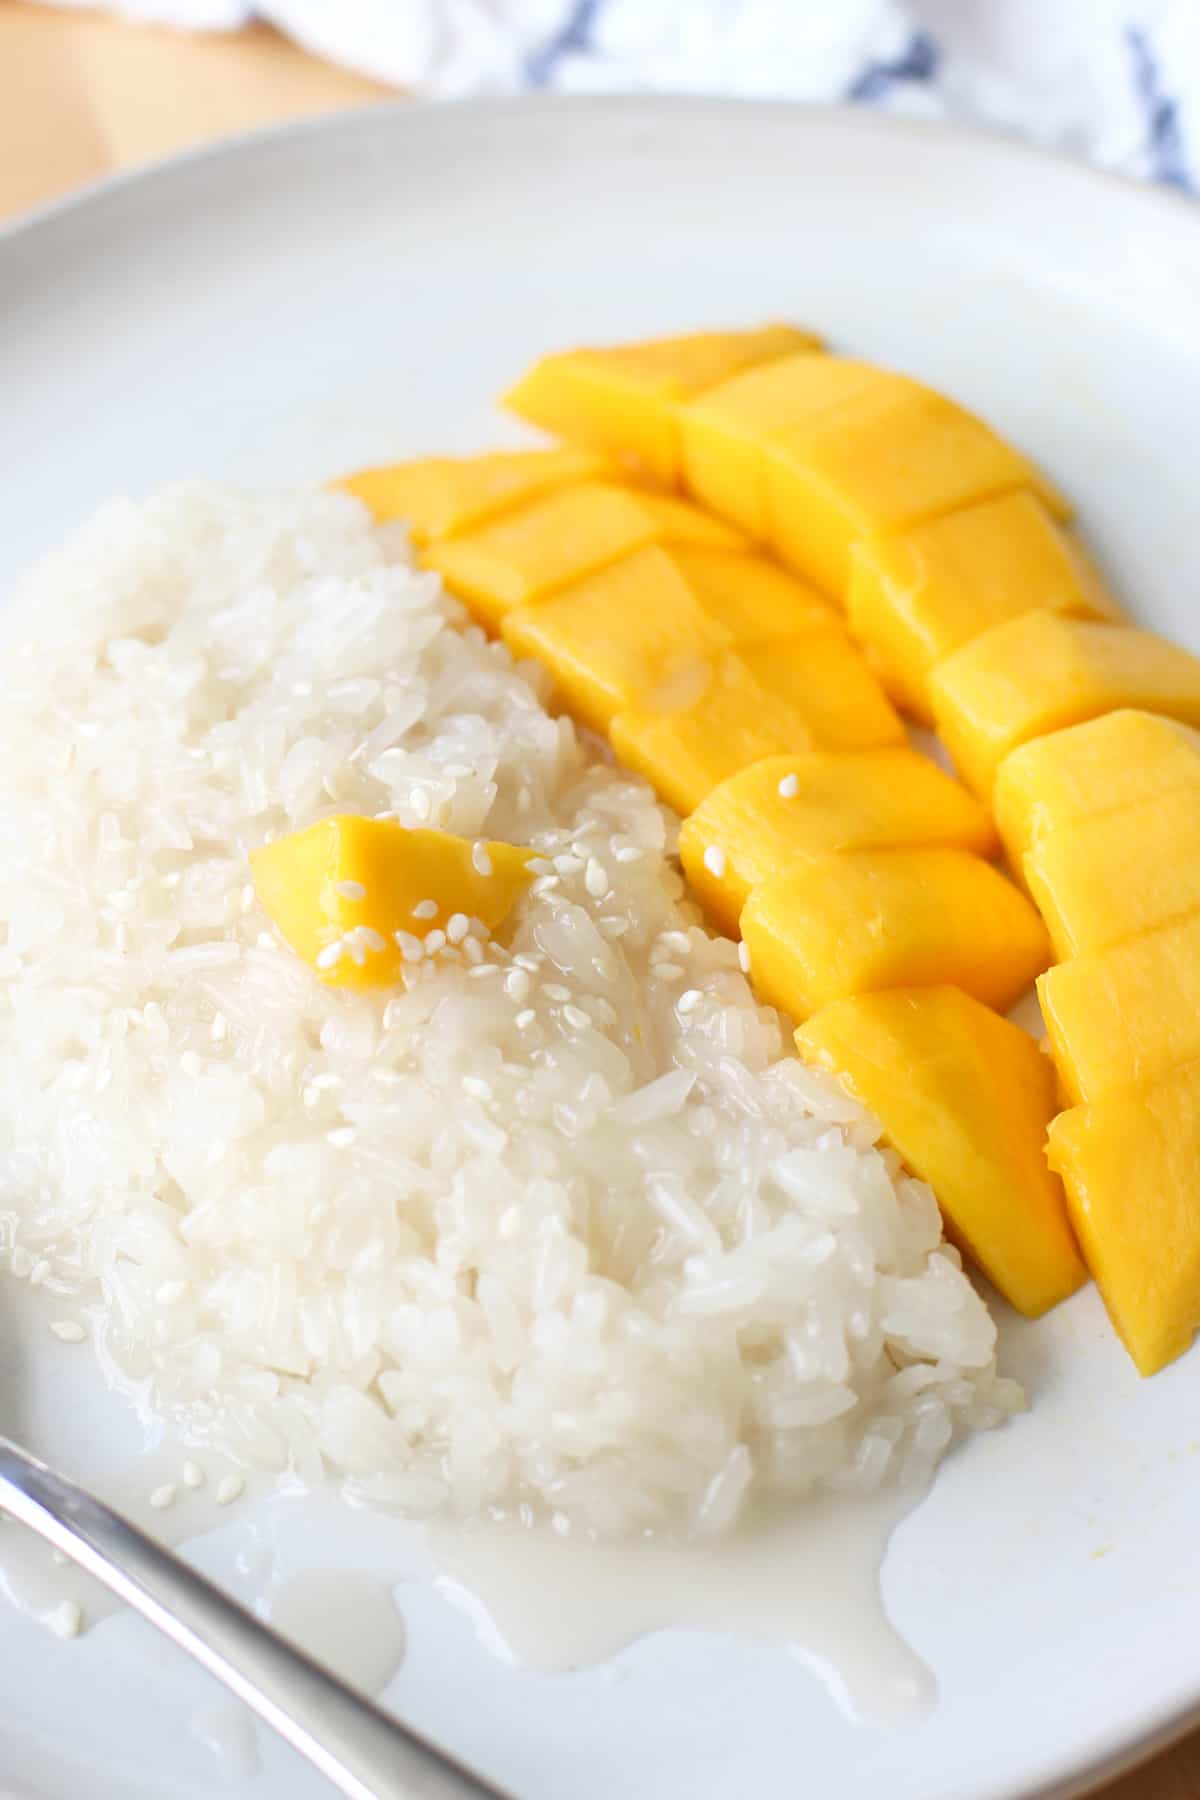 Thai Recipes From My Kitchen: Sticky Rice or Glutinous Rice